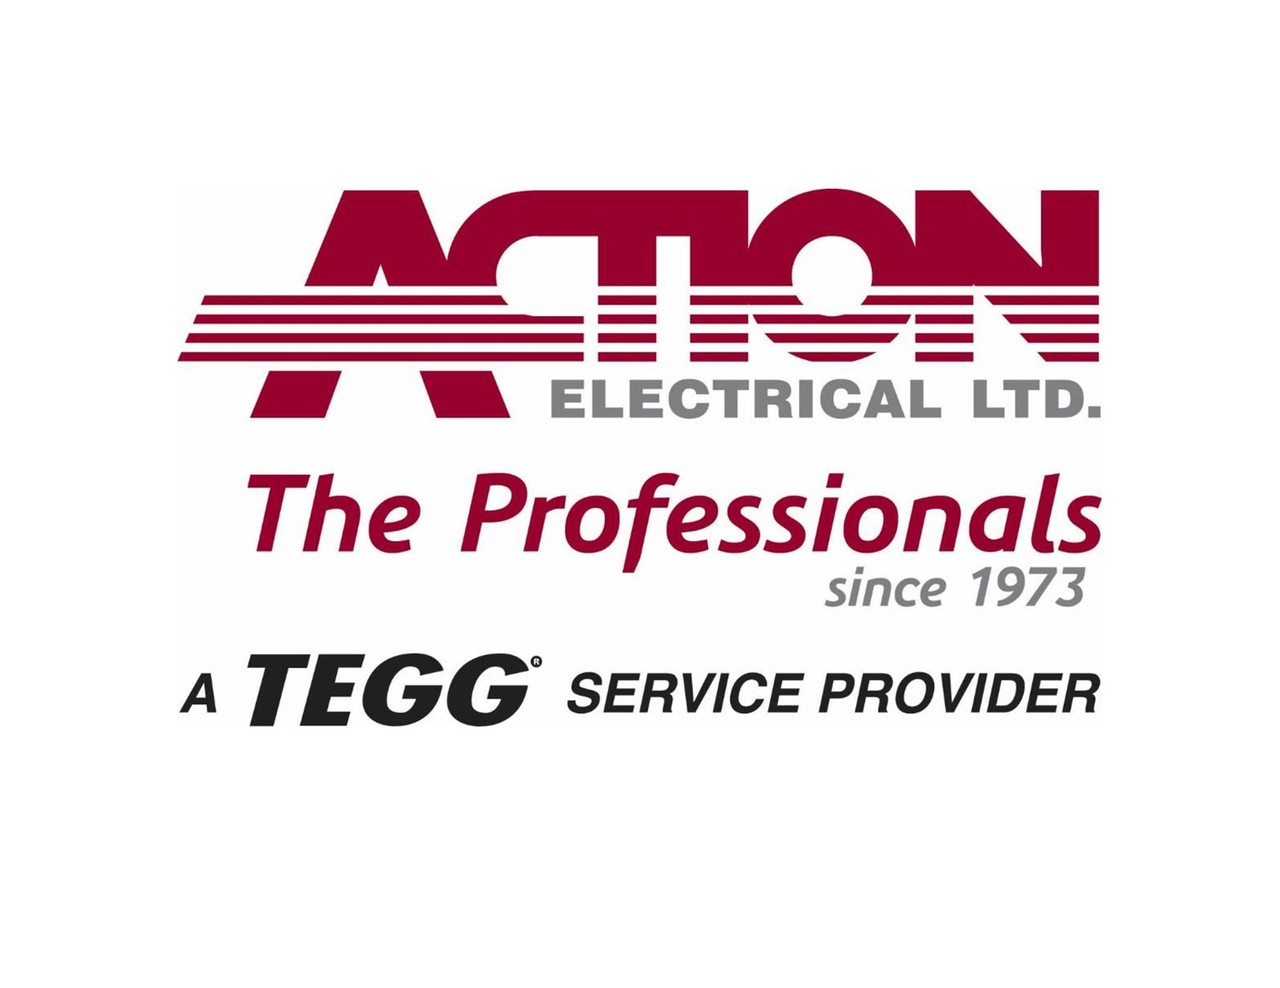 Photo uploaded by Action Electrical Ltd